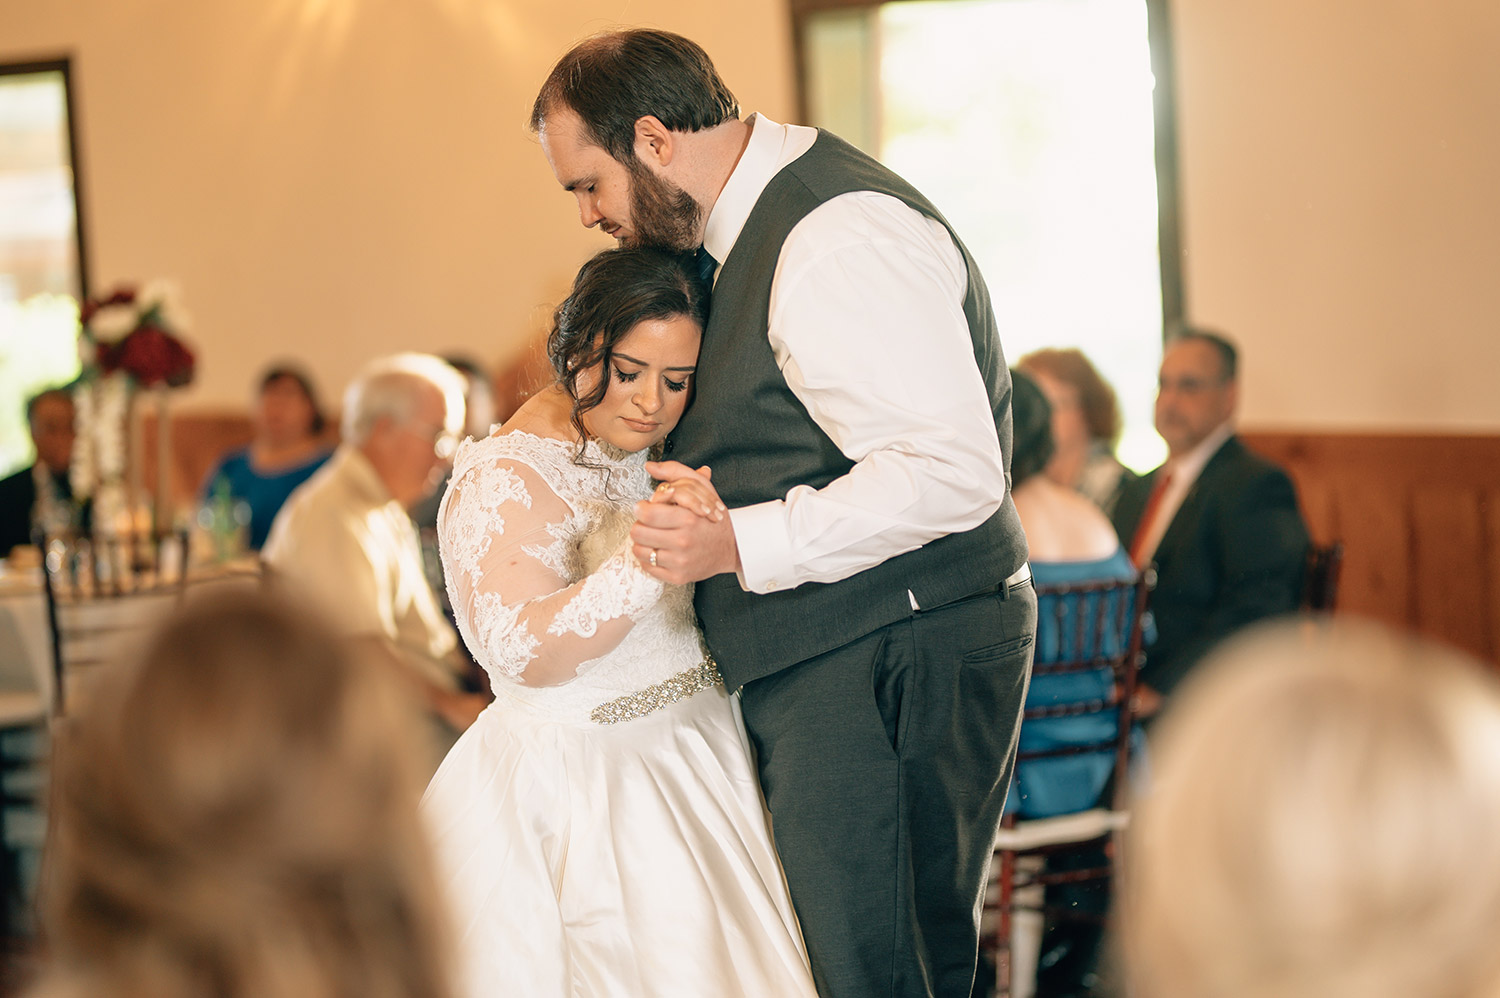 bride and groom first dance during wedding at cotton gin no. 116